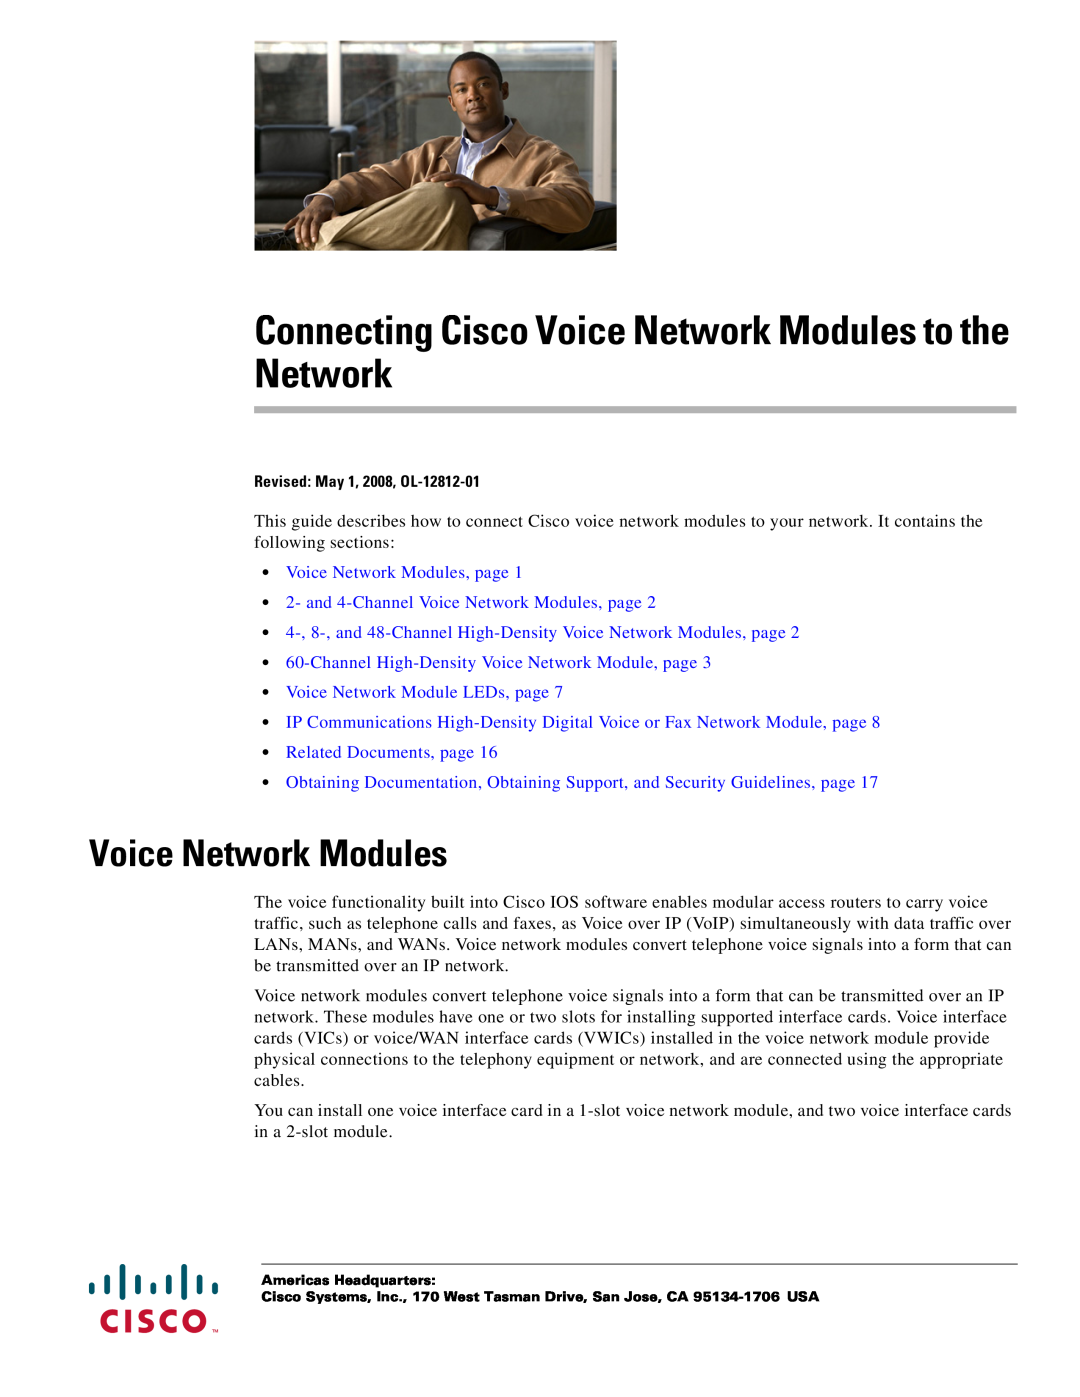 Cisco Systems OL-12812-01 manual Connecting Cisco Voice Network Modules to the Network, Voice Network Modules, page 